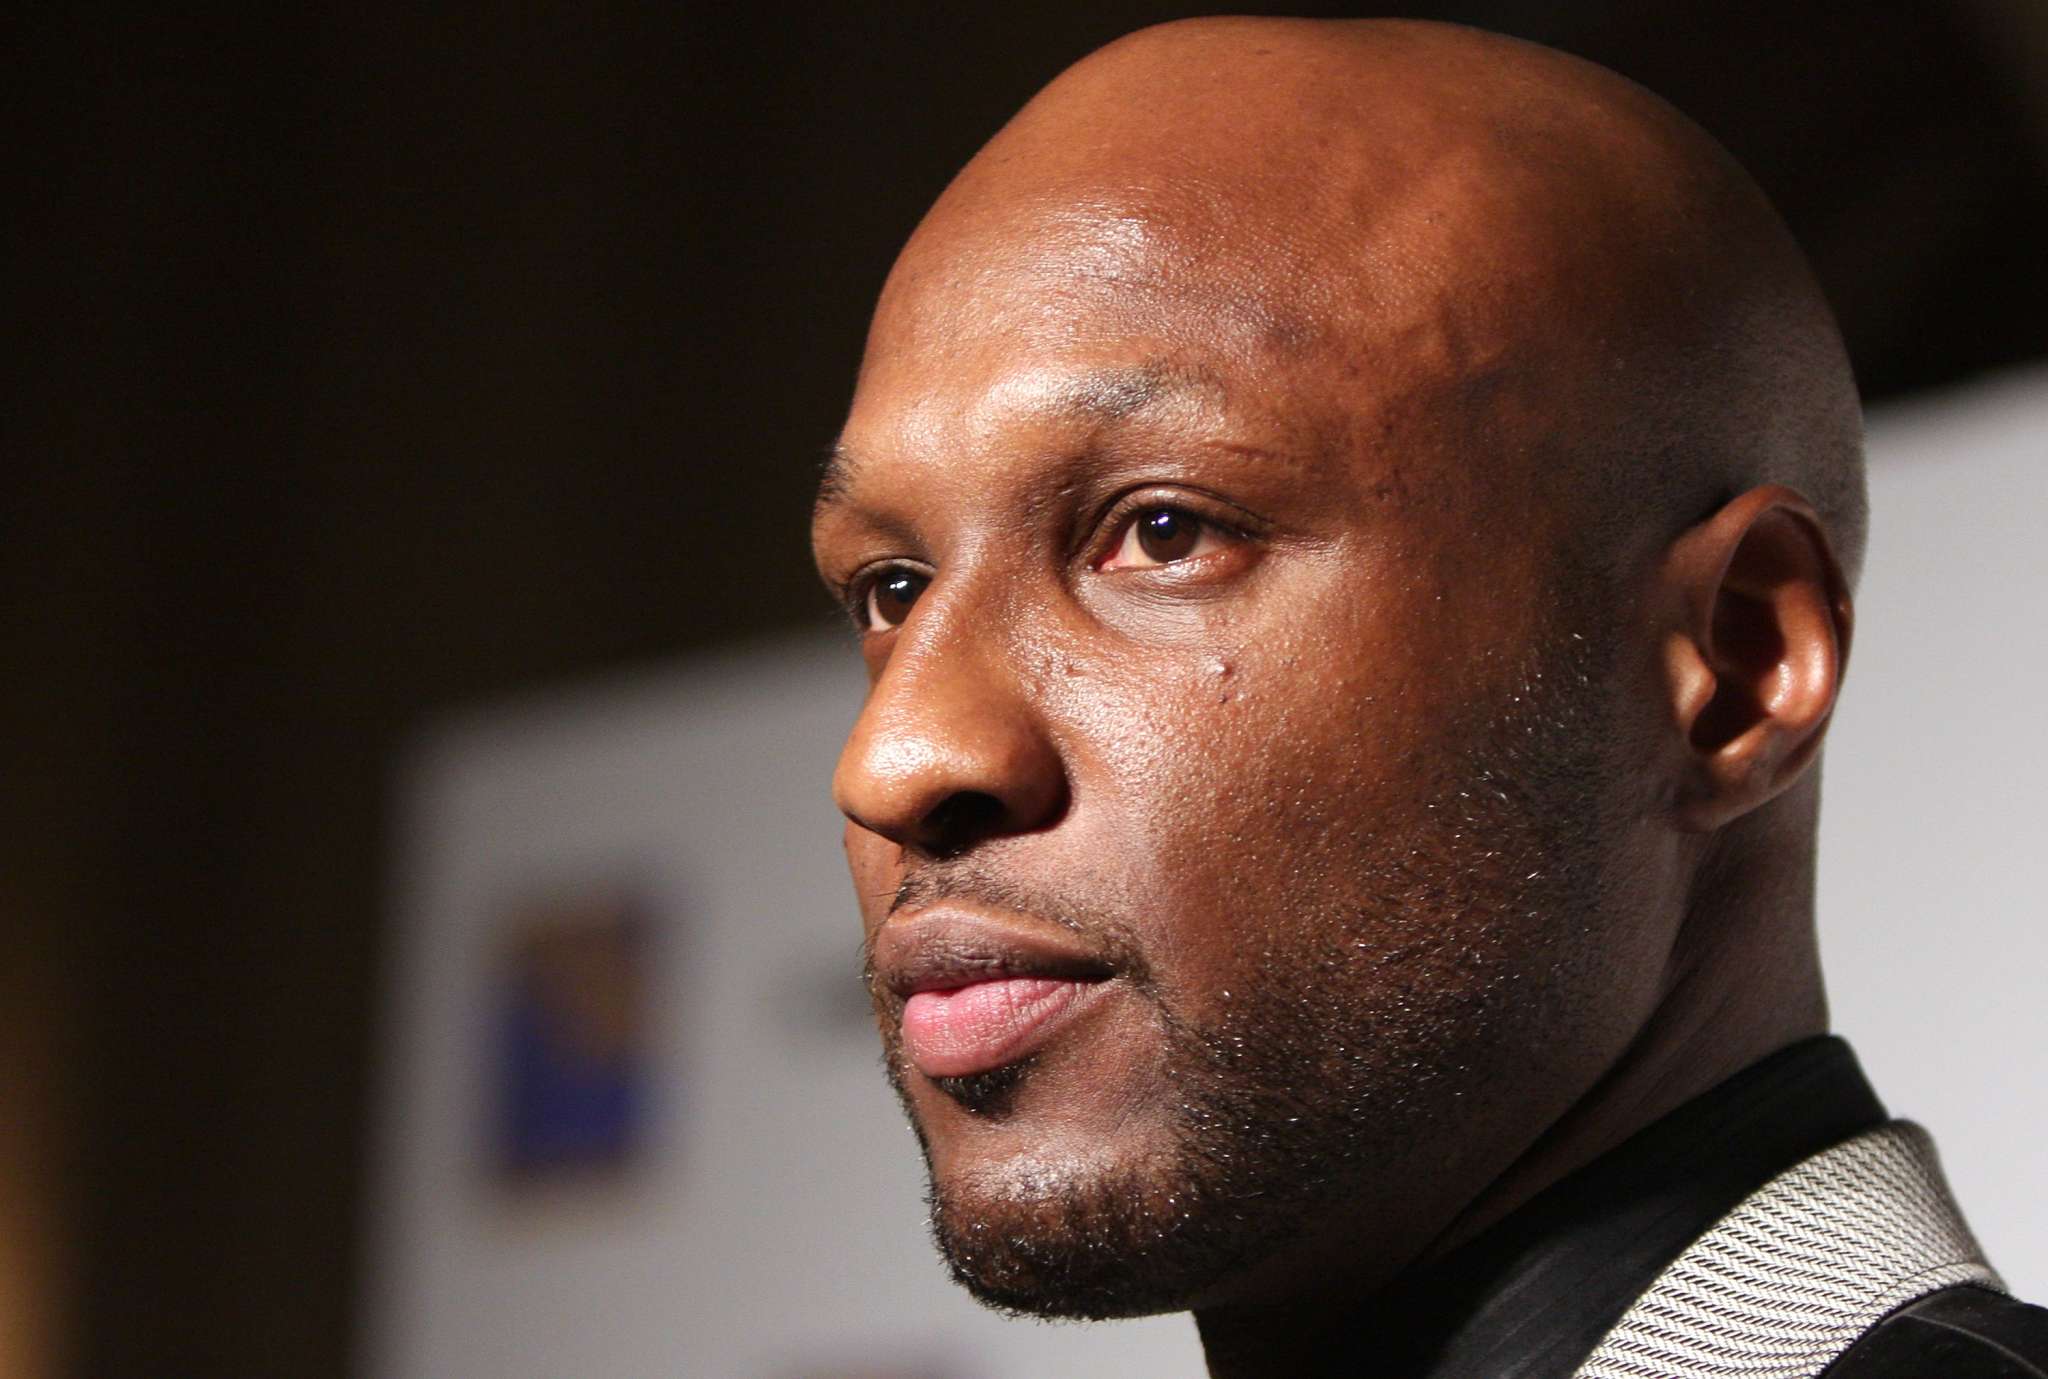 Lamar Odom's Fans Are Celebrating The Release Of His New Memoir: 'Darkness To LIght'